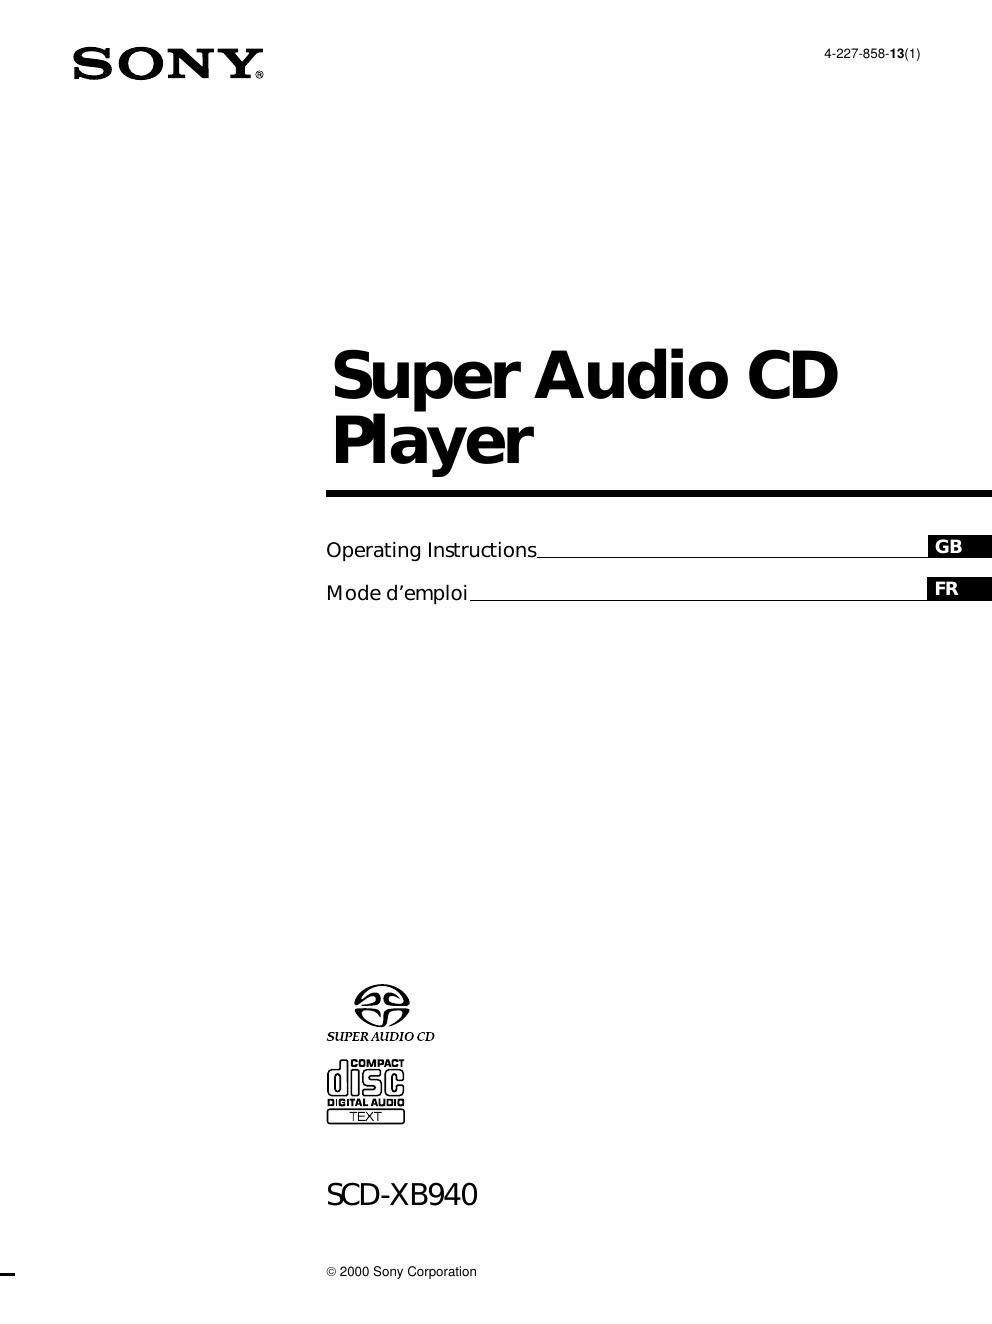 sony scd xb 940 owners manual